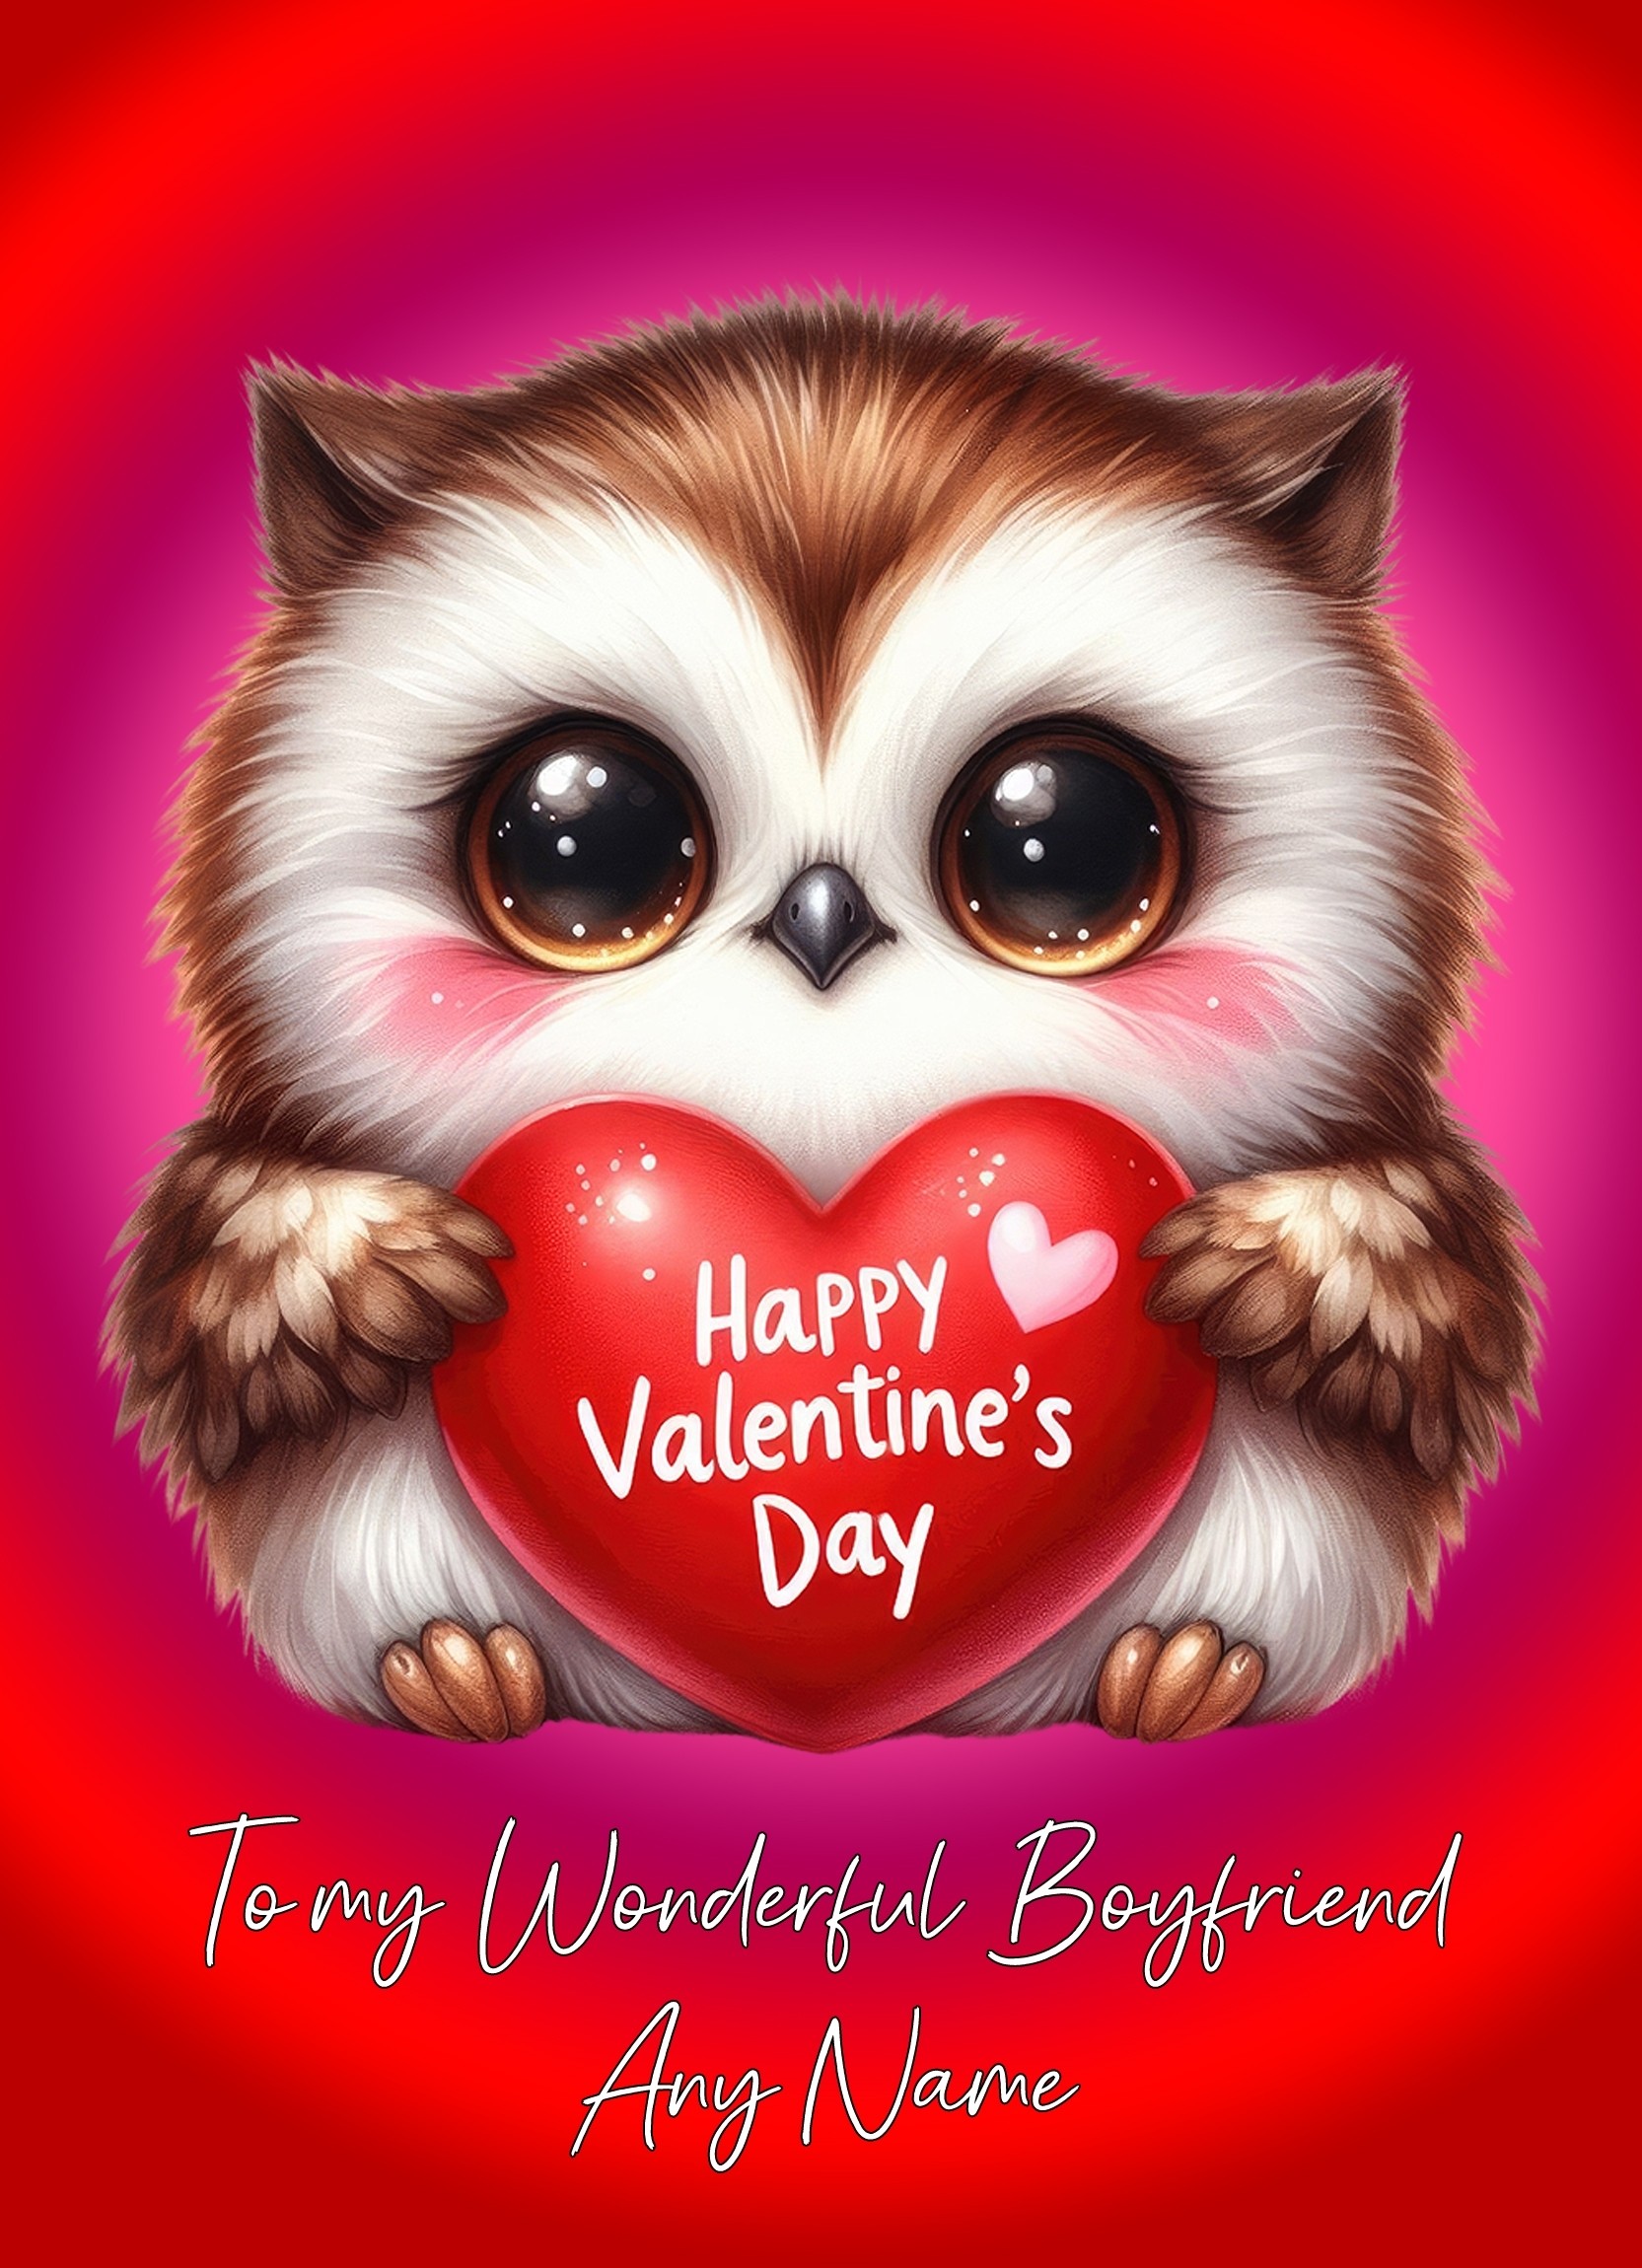 Personalised Valentines Day Card for Boyfriend (Owl)